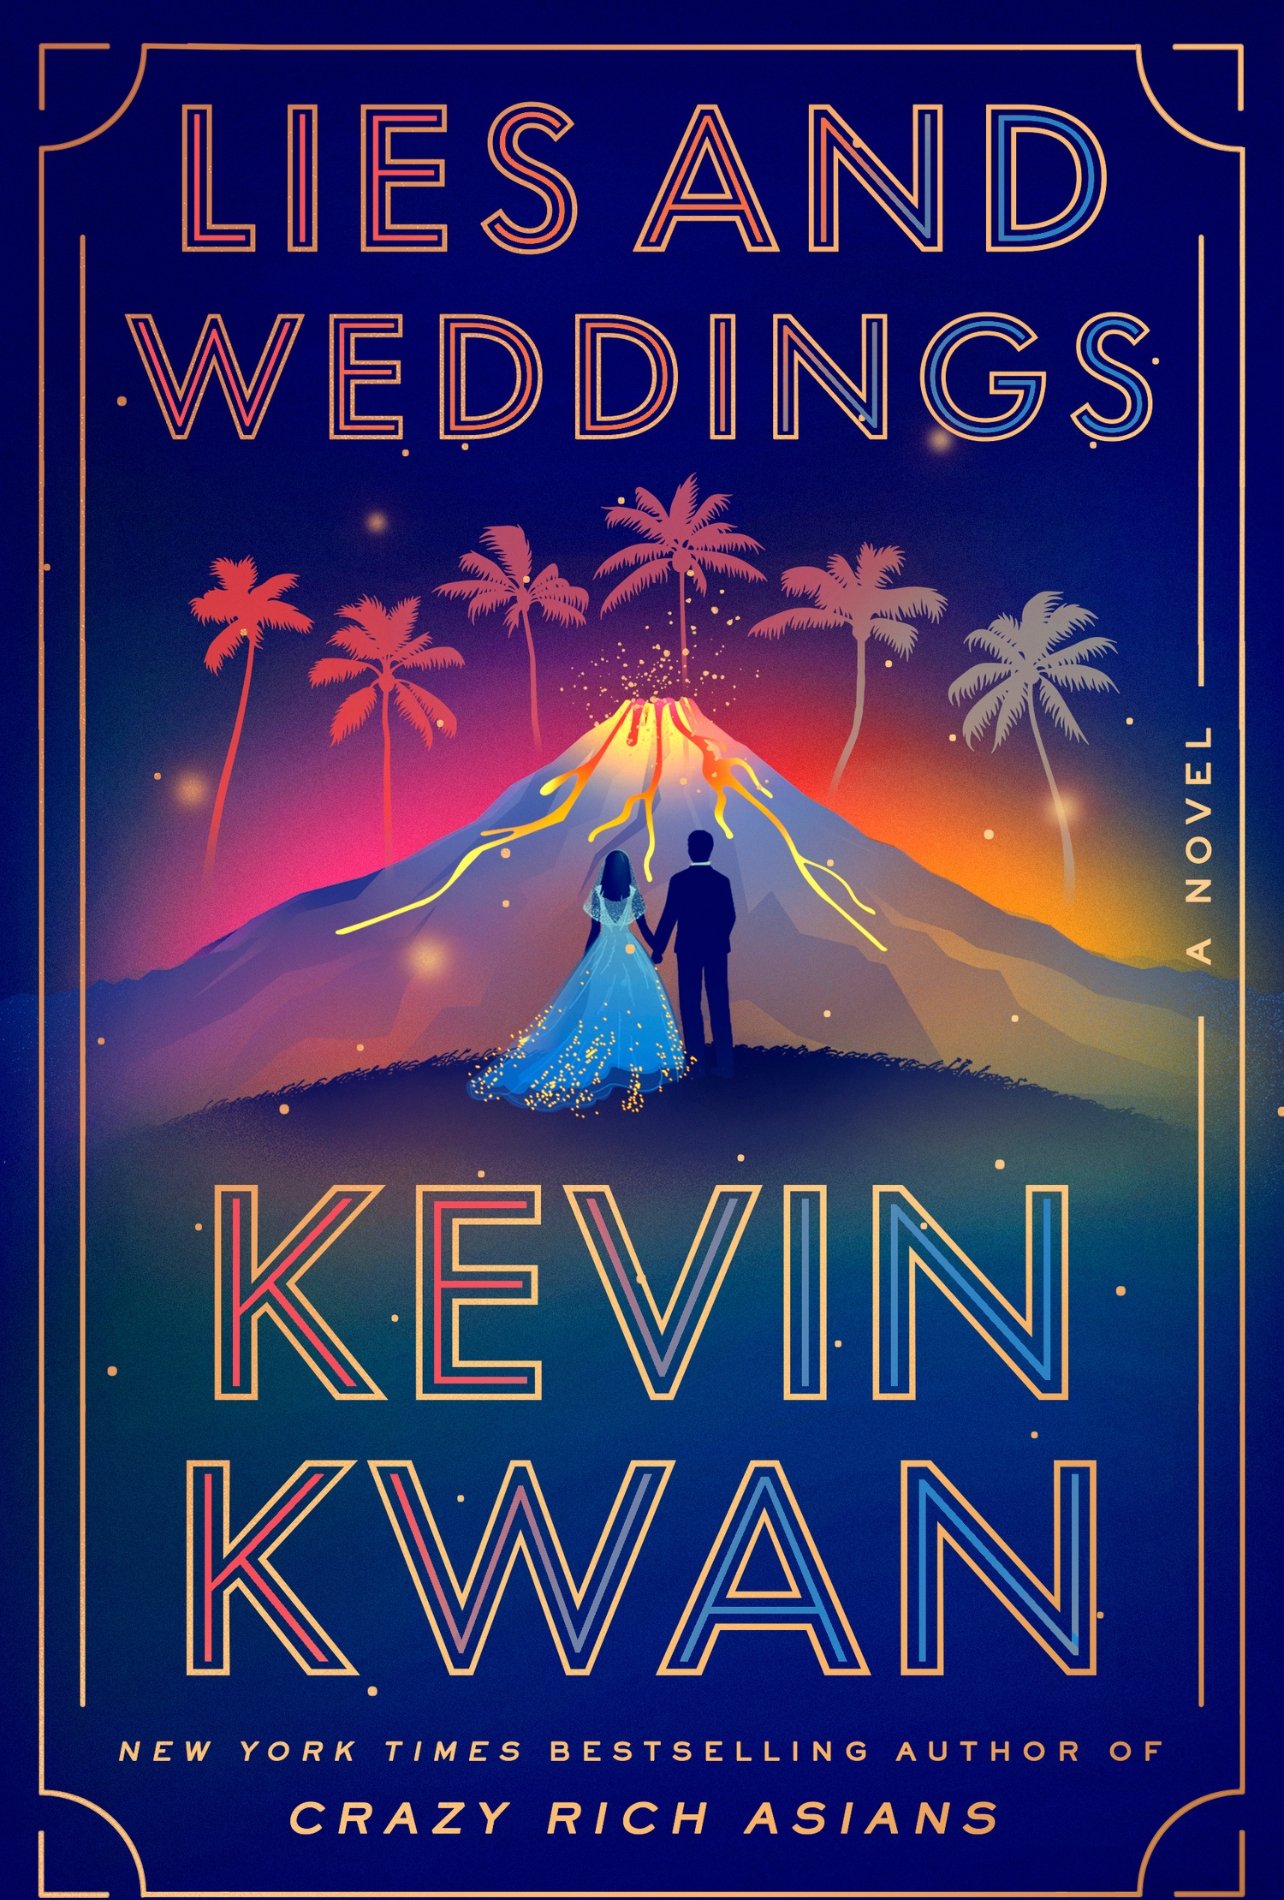 “Lies and Weddings” book cover written by Kevin Kwan